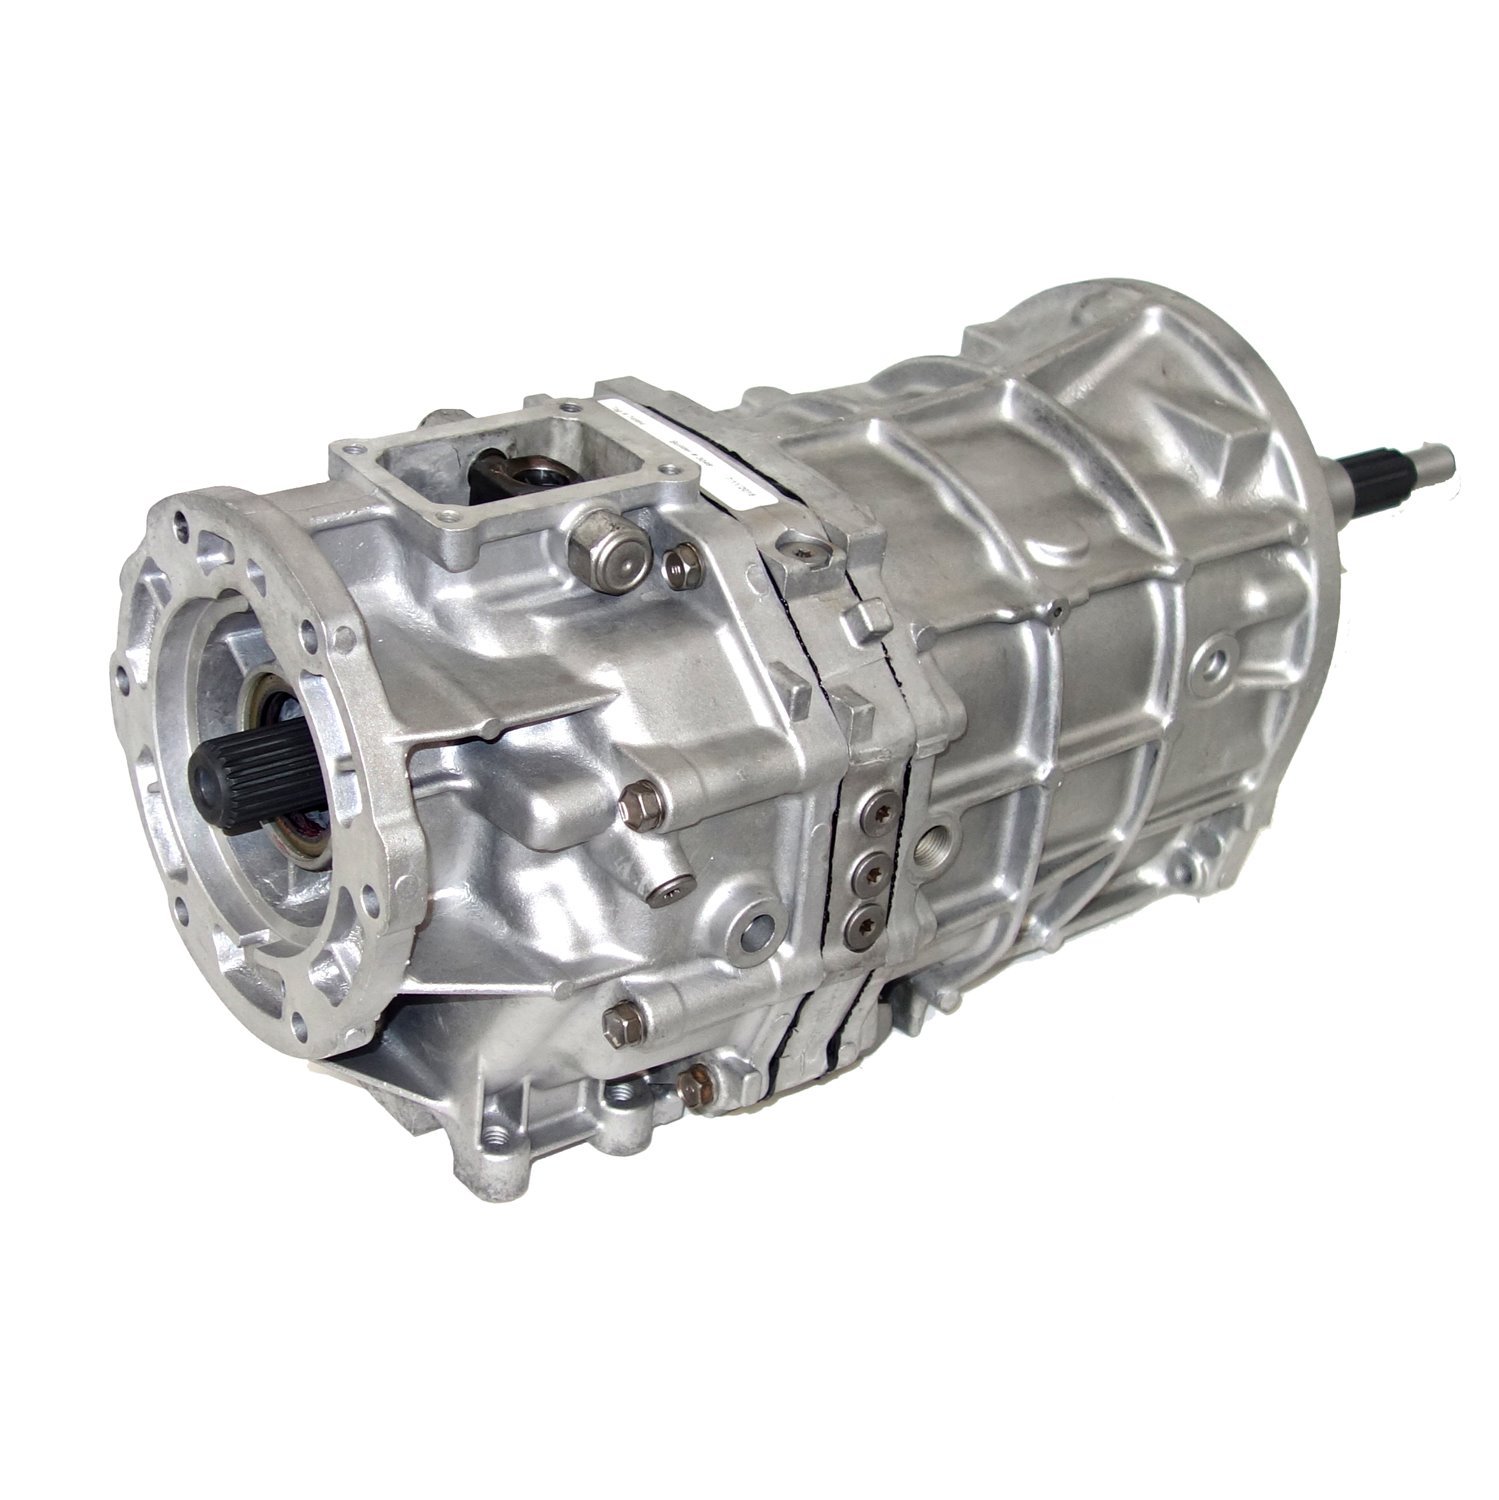 Remanufactured AX15 Manual Transmission for Jeep 94-00 Cherokee, 5 Speed